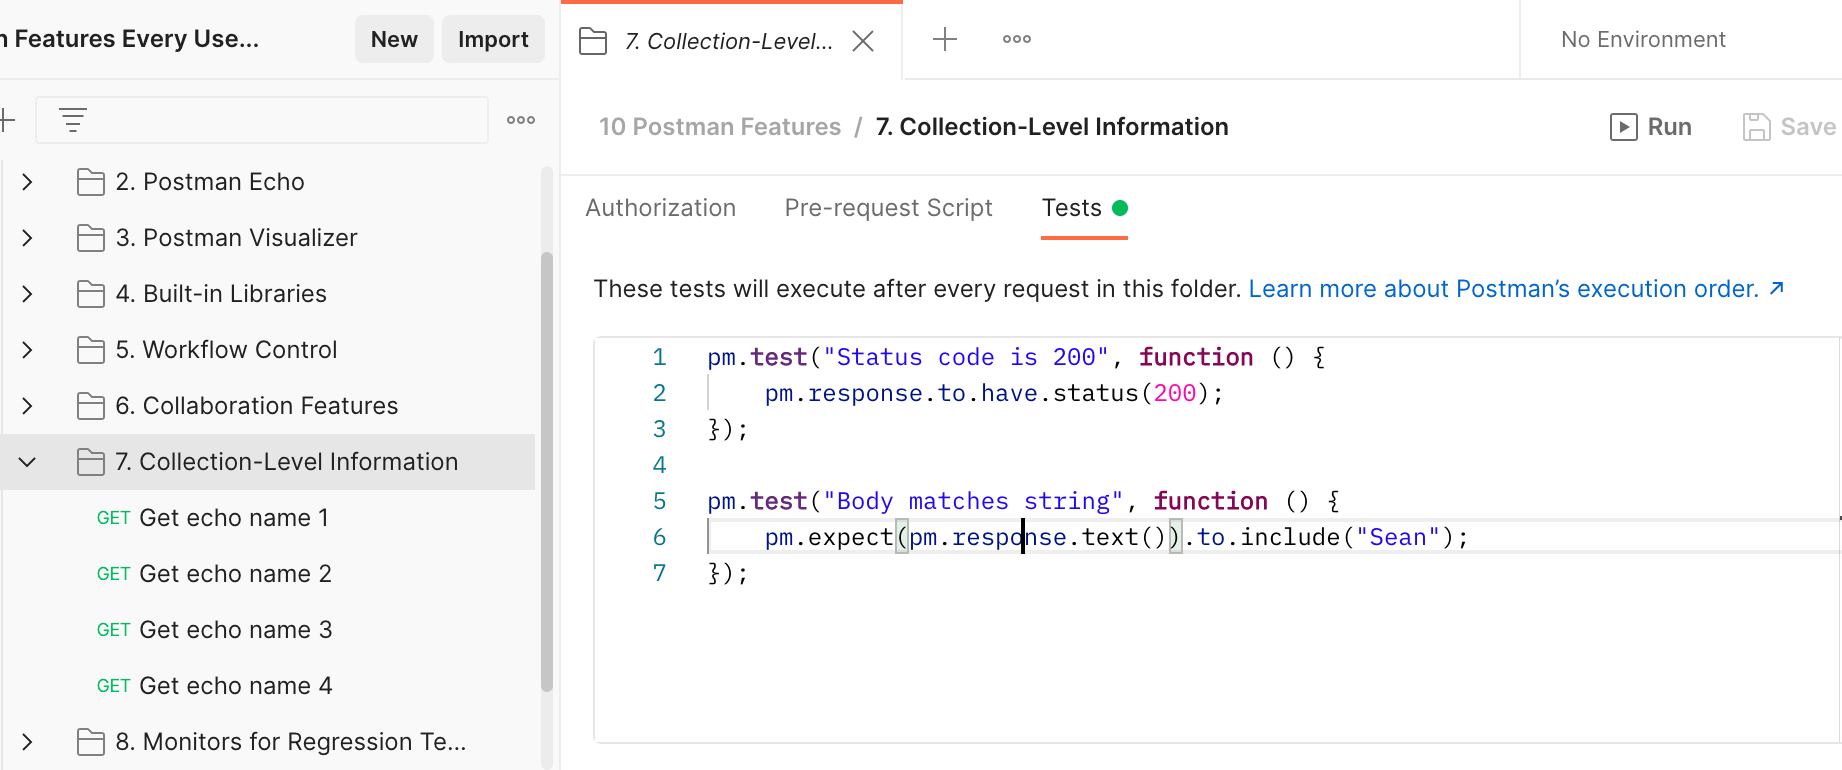 If the “7. Collection-Level Information” collection is run, both of the tests shown will run for all of the requests in the folder.